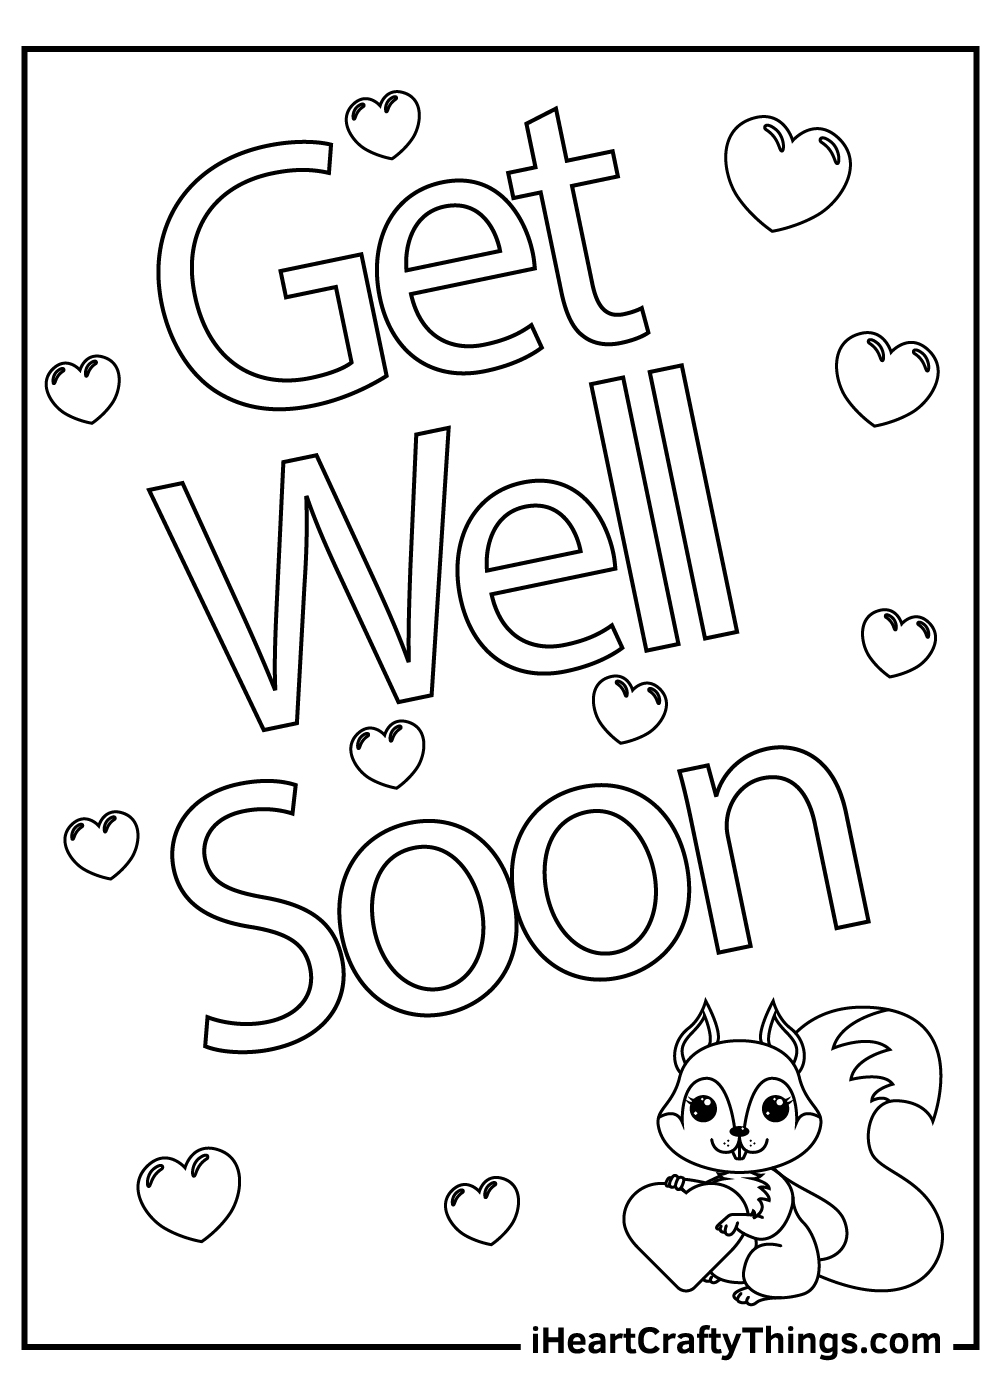 Get well soon coloring pages free printables